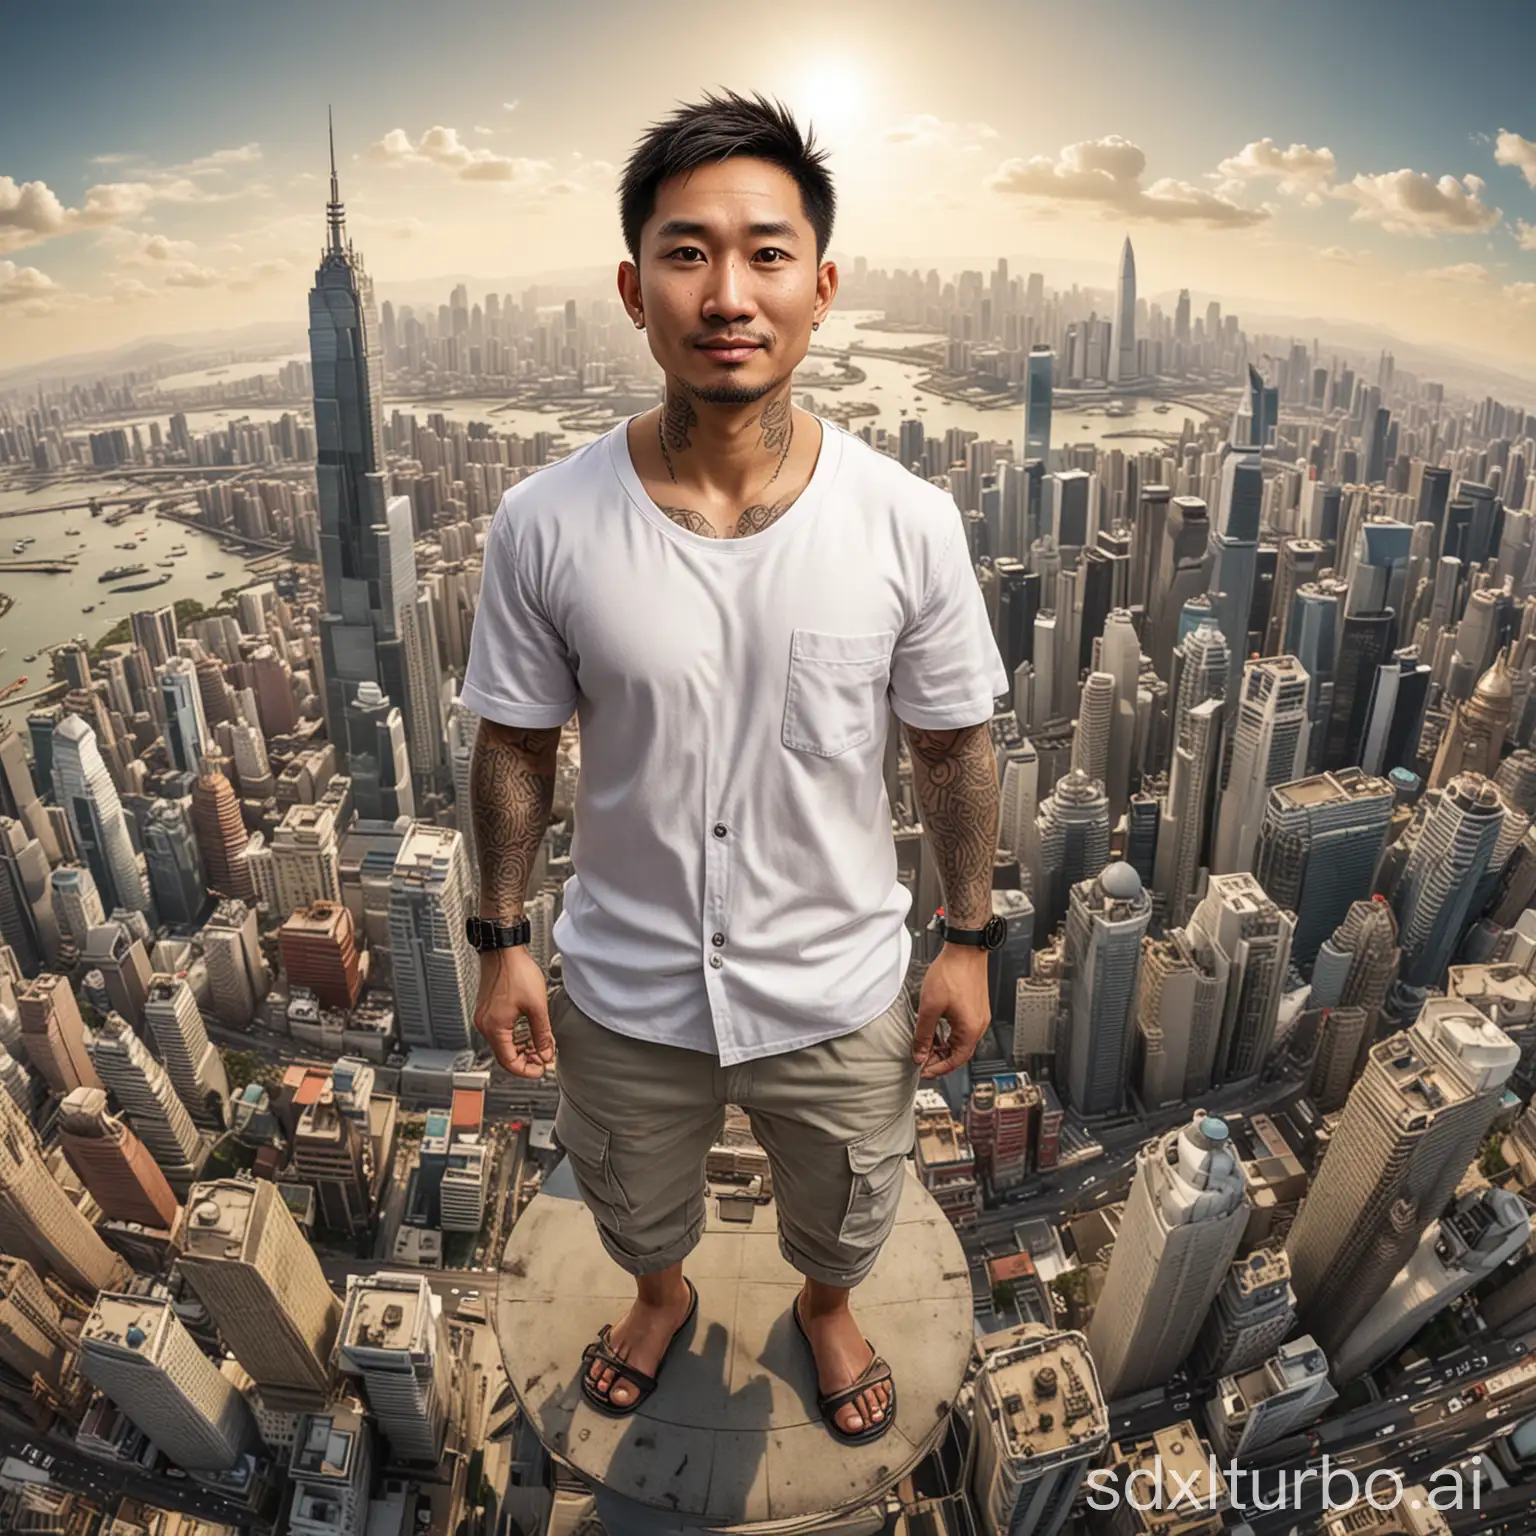 Created a hyperrealistic 4D caricature of a 35 year old Asian man, big head, clean face, wearing white clothes, cargo pants, flip-flops, right arm with full tattoos up to the neck, big round earring. standing at the top of the tallest building while holding the cameraman's hand. Beautiful city background, shot from above, fisheye lens